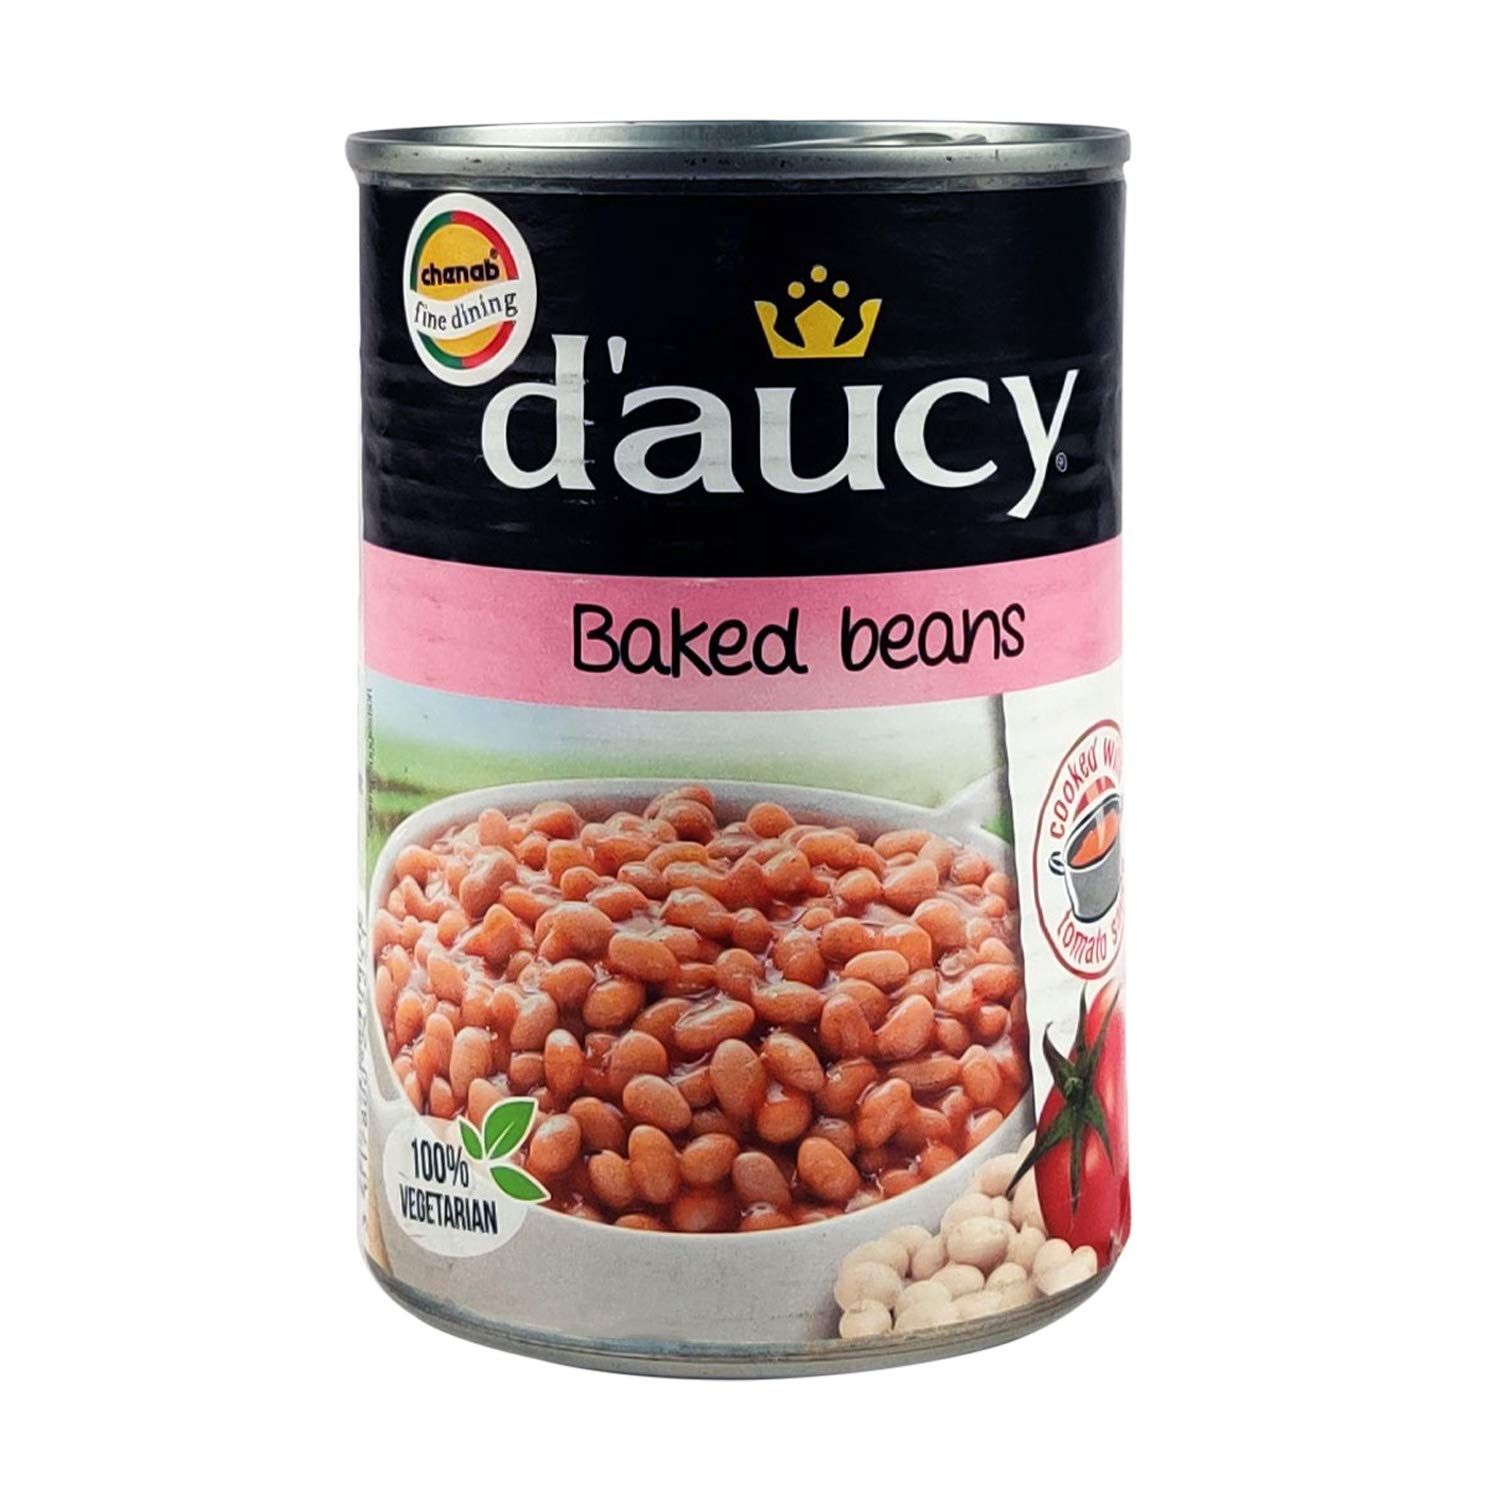 Daucy Pre-Cooked Baked Beans Image